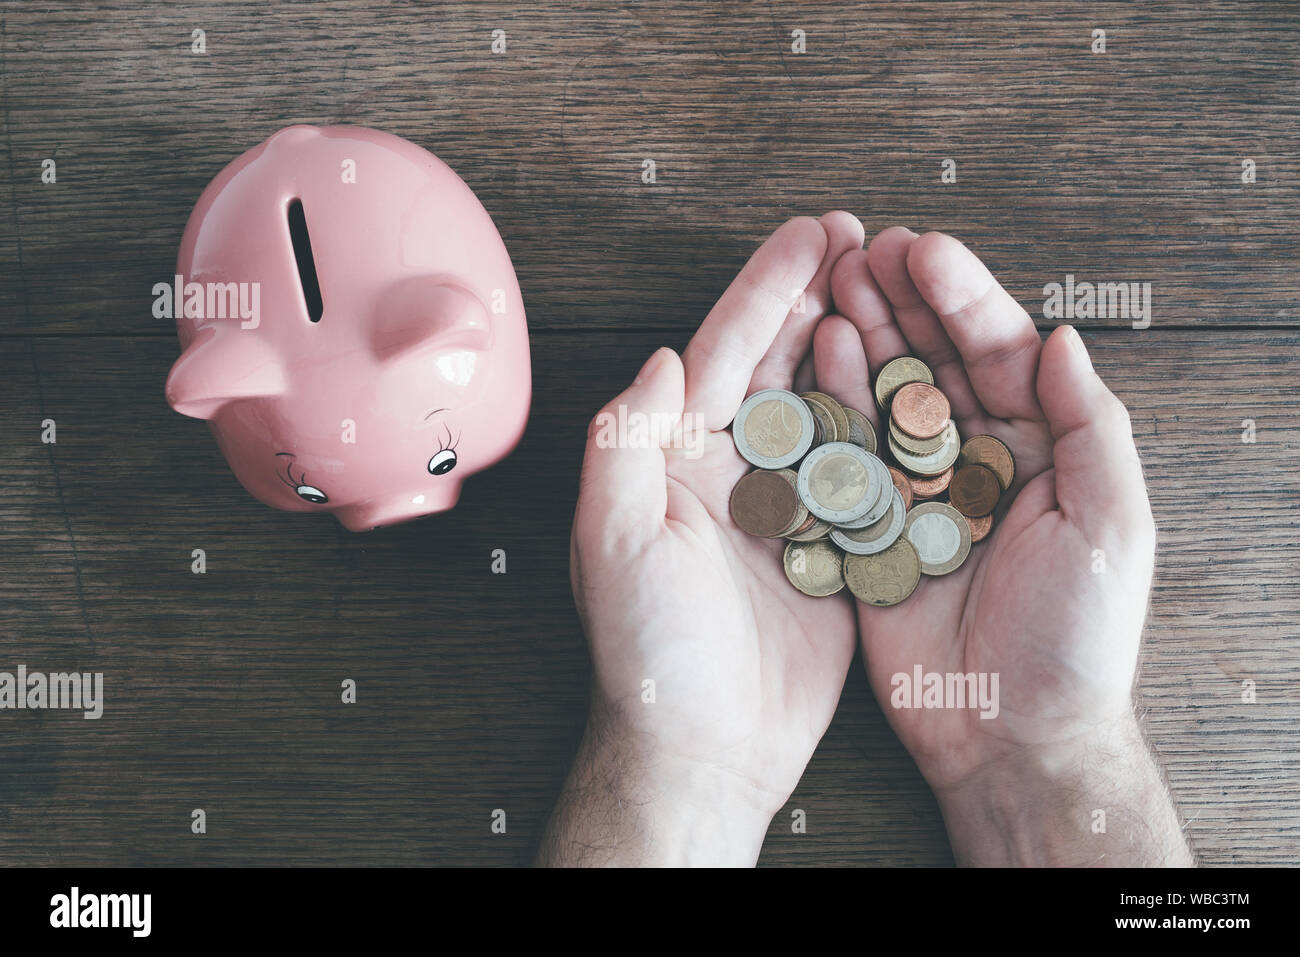 top view of hands of man holding coins next to piggy bank on rustic wooden table, saving money concept Stock Photo